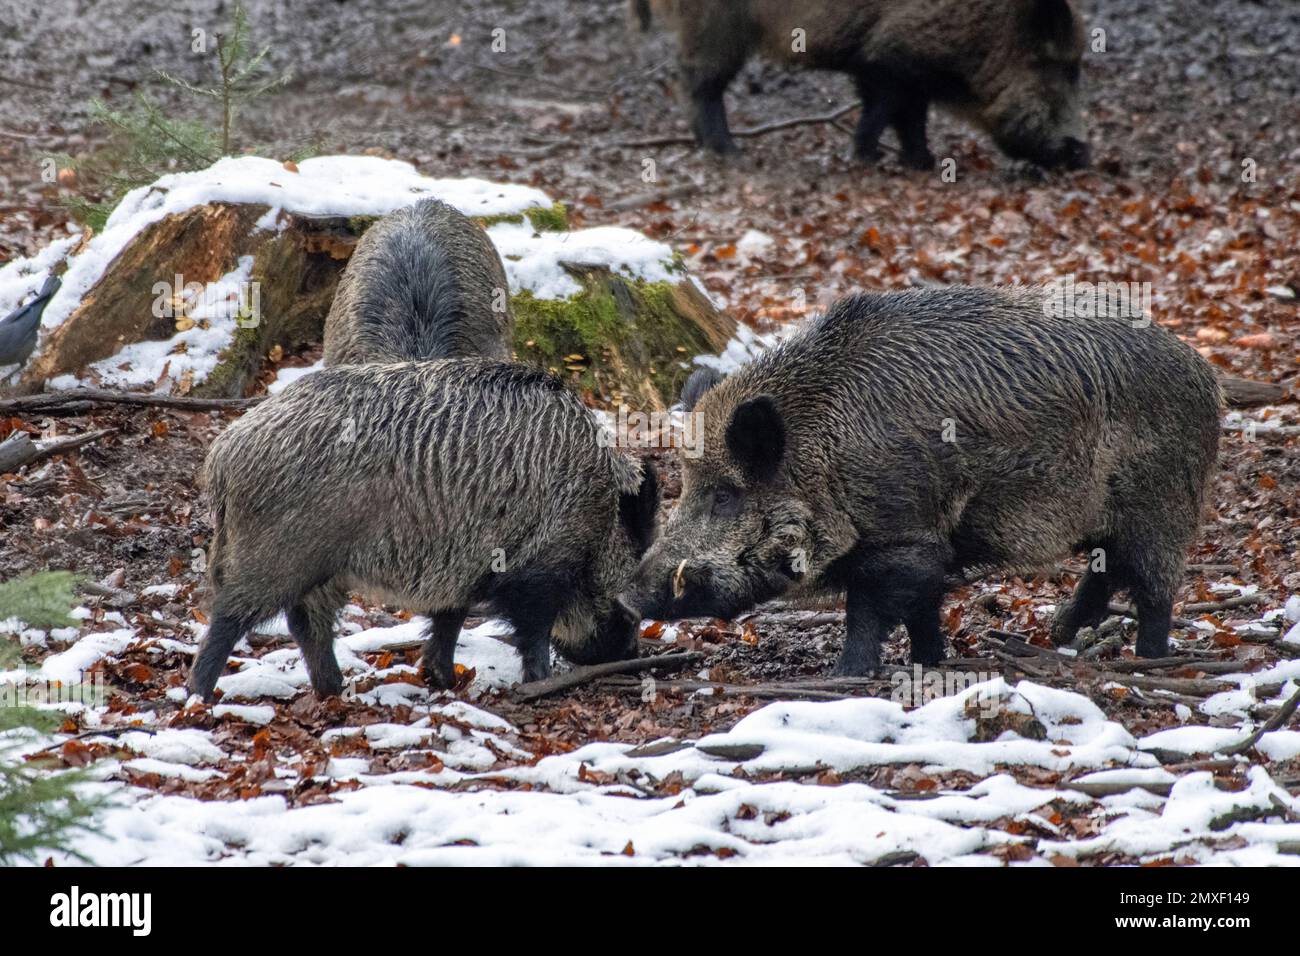 Sows in the beech forest, mating season Stock Photo